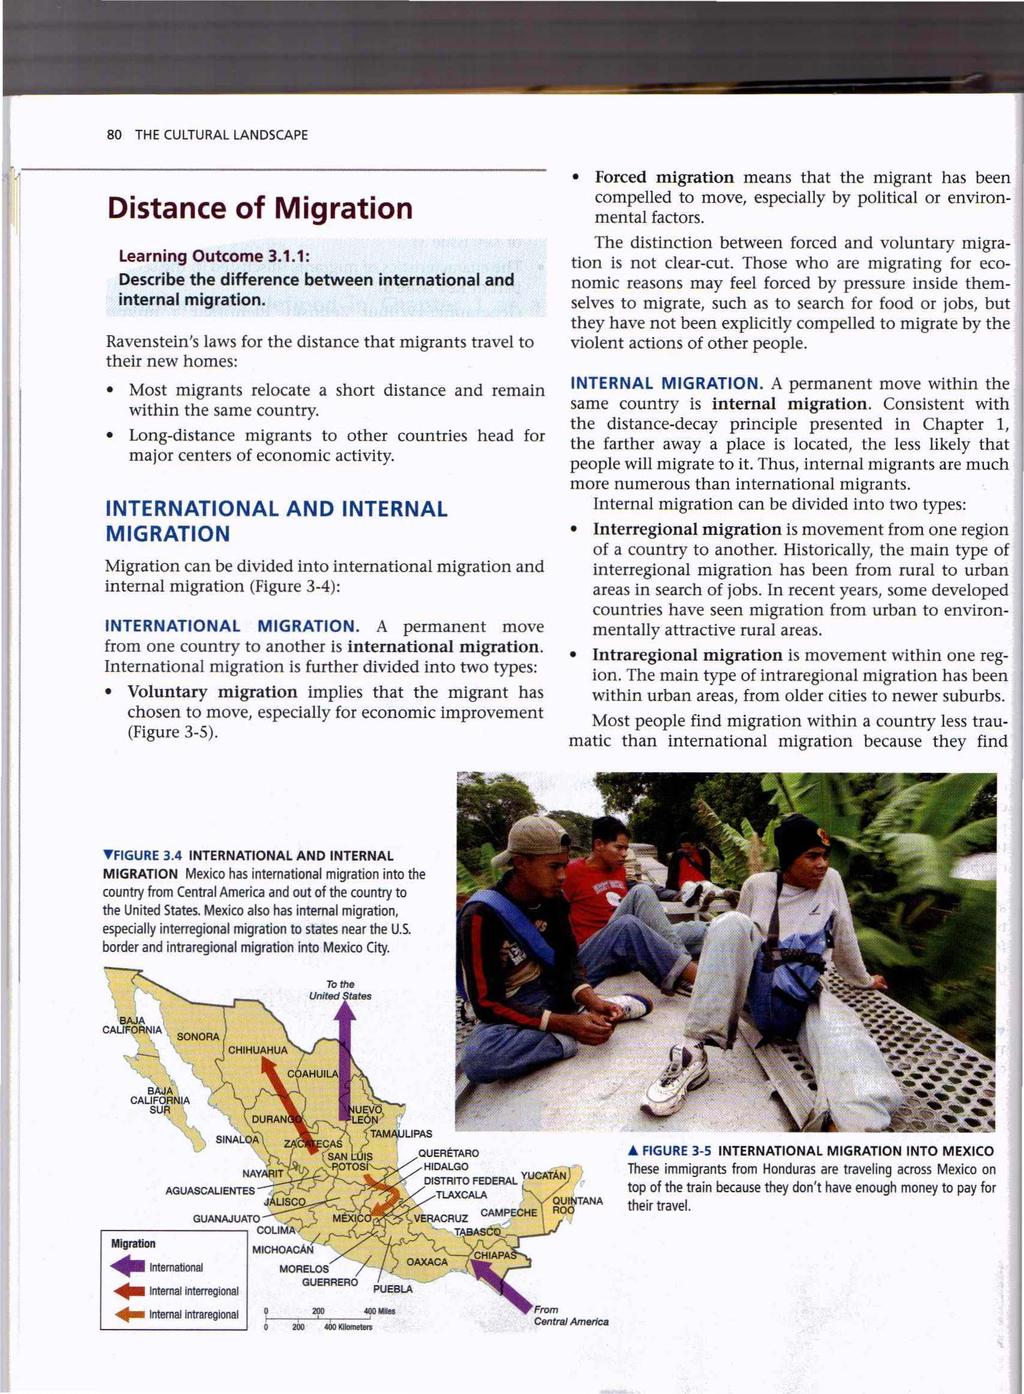 80 THE CULTURAL LANDSCAPE Distance of Migration Learning Outcome 3.1.1: Describe the difference between international and internal migration.